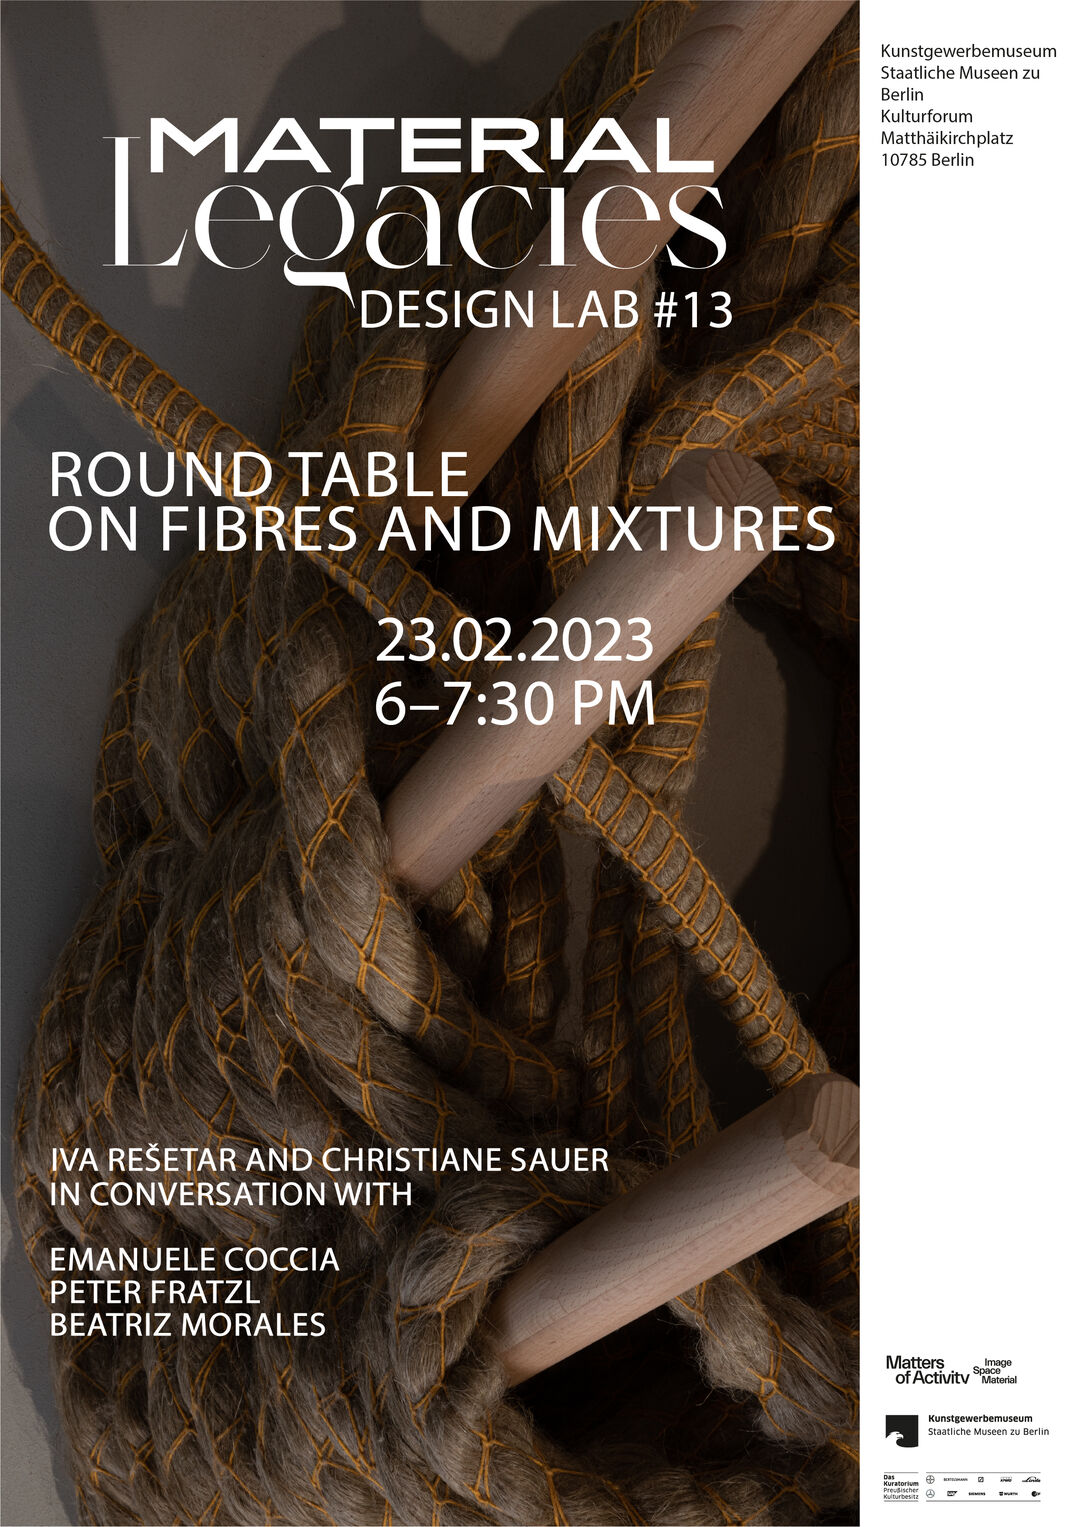 Round Table »On Fibres amd Mixtures«. Foto: Michelle Mantel. Design: studioeins, adapted by »Matters of Activity«
